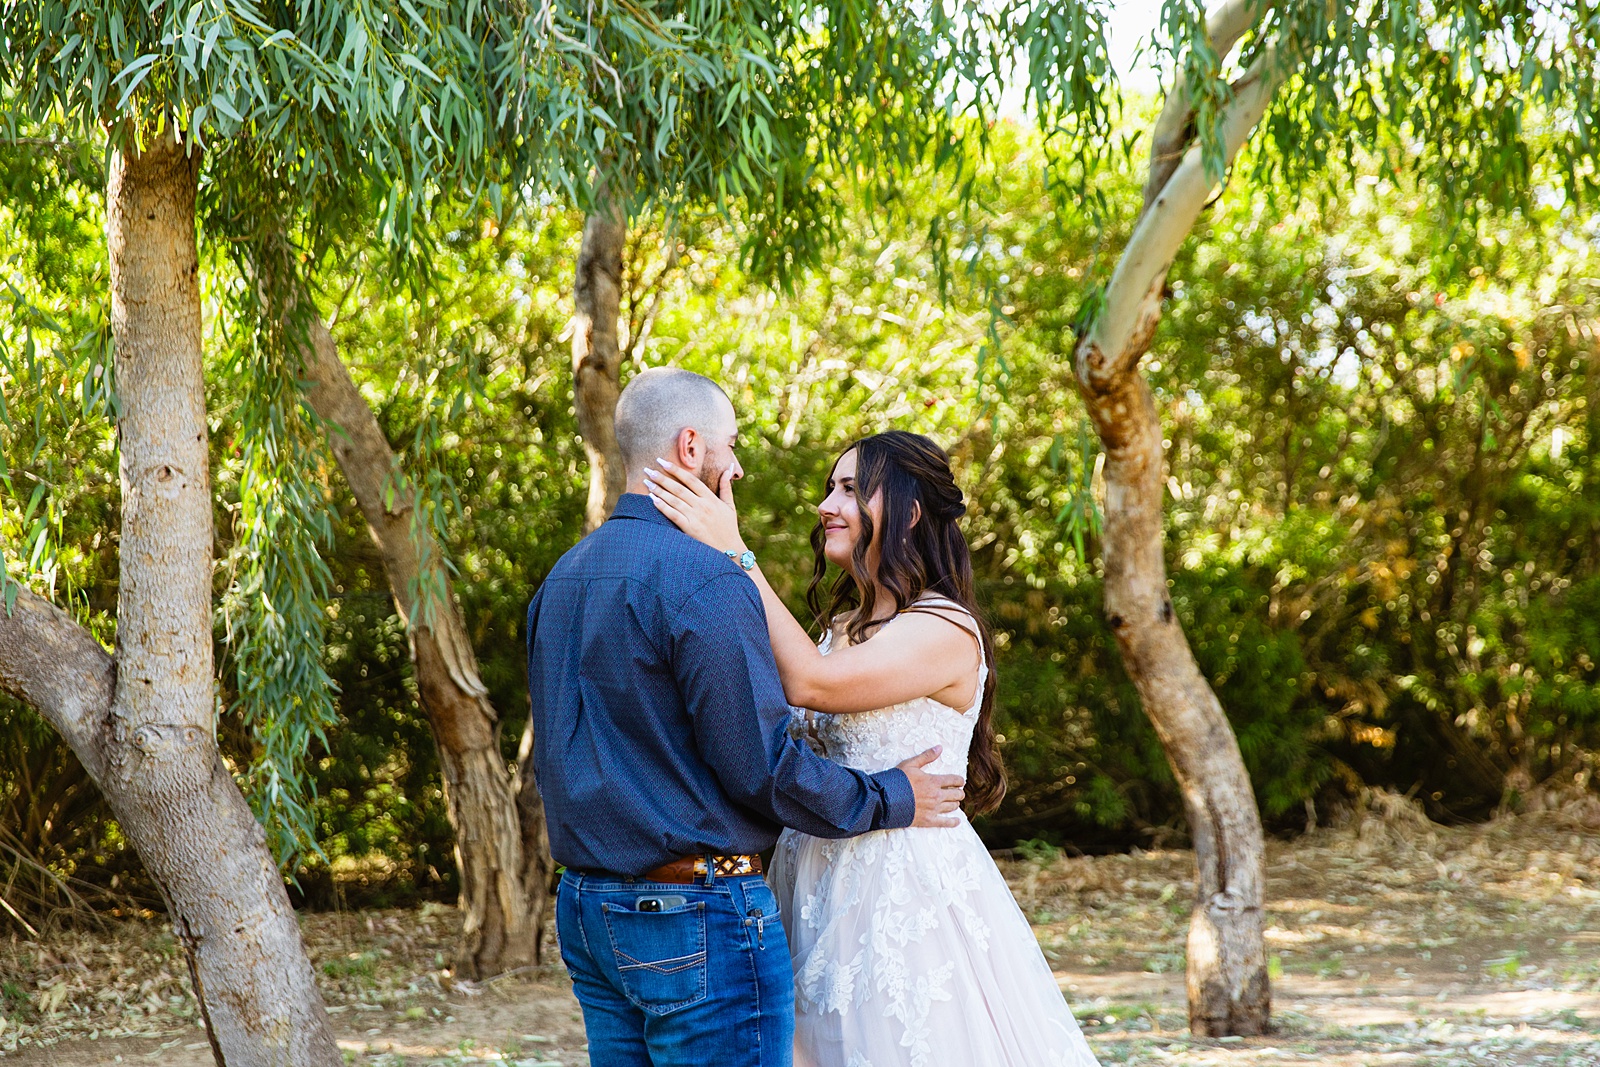 Bride & Groom share an intimate moment during their first look at intimate backyard wedding by Phoenix wedding photographer Juniper and Co Photography.